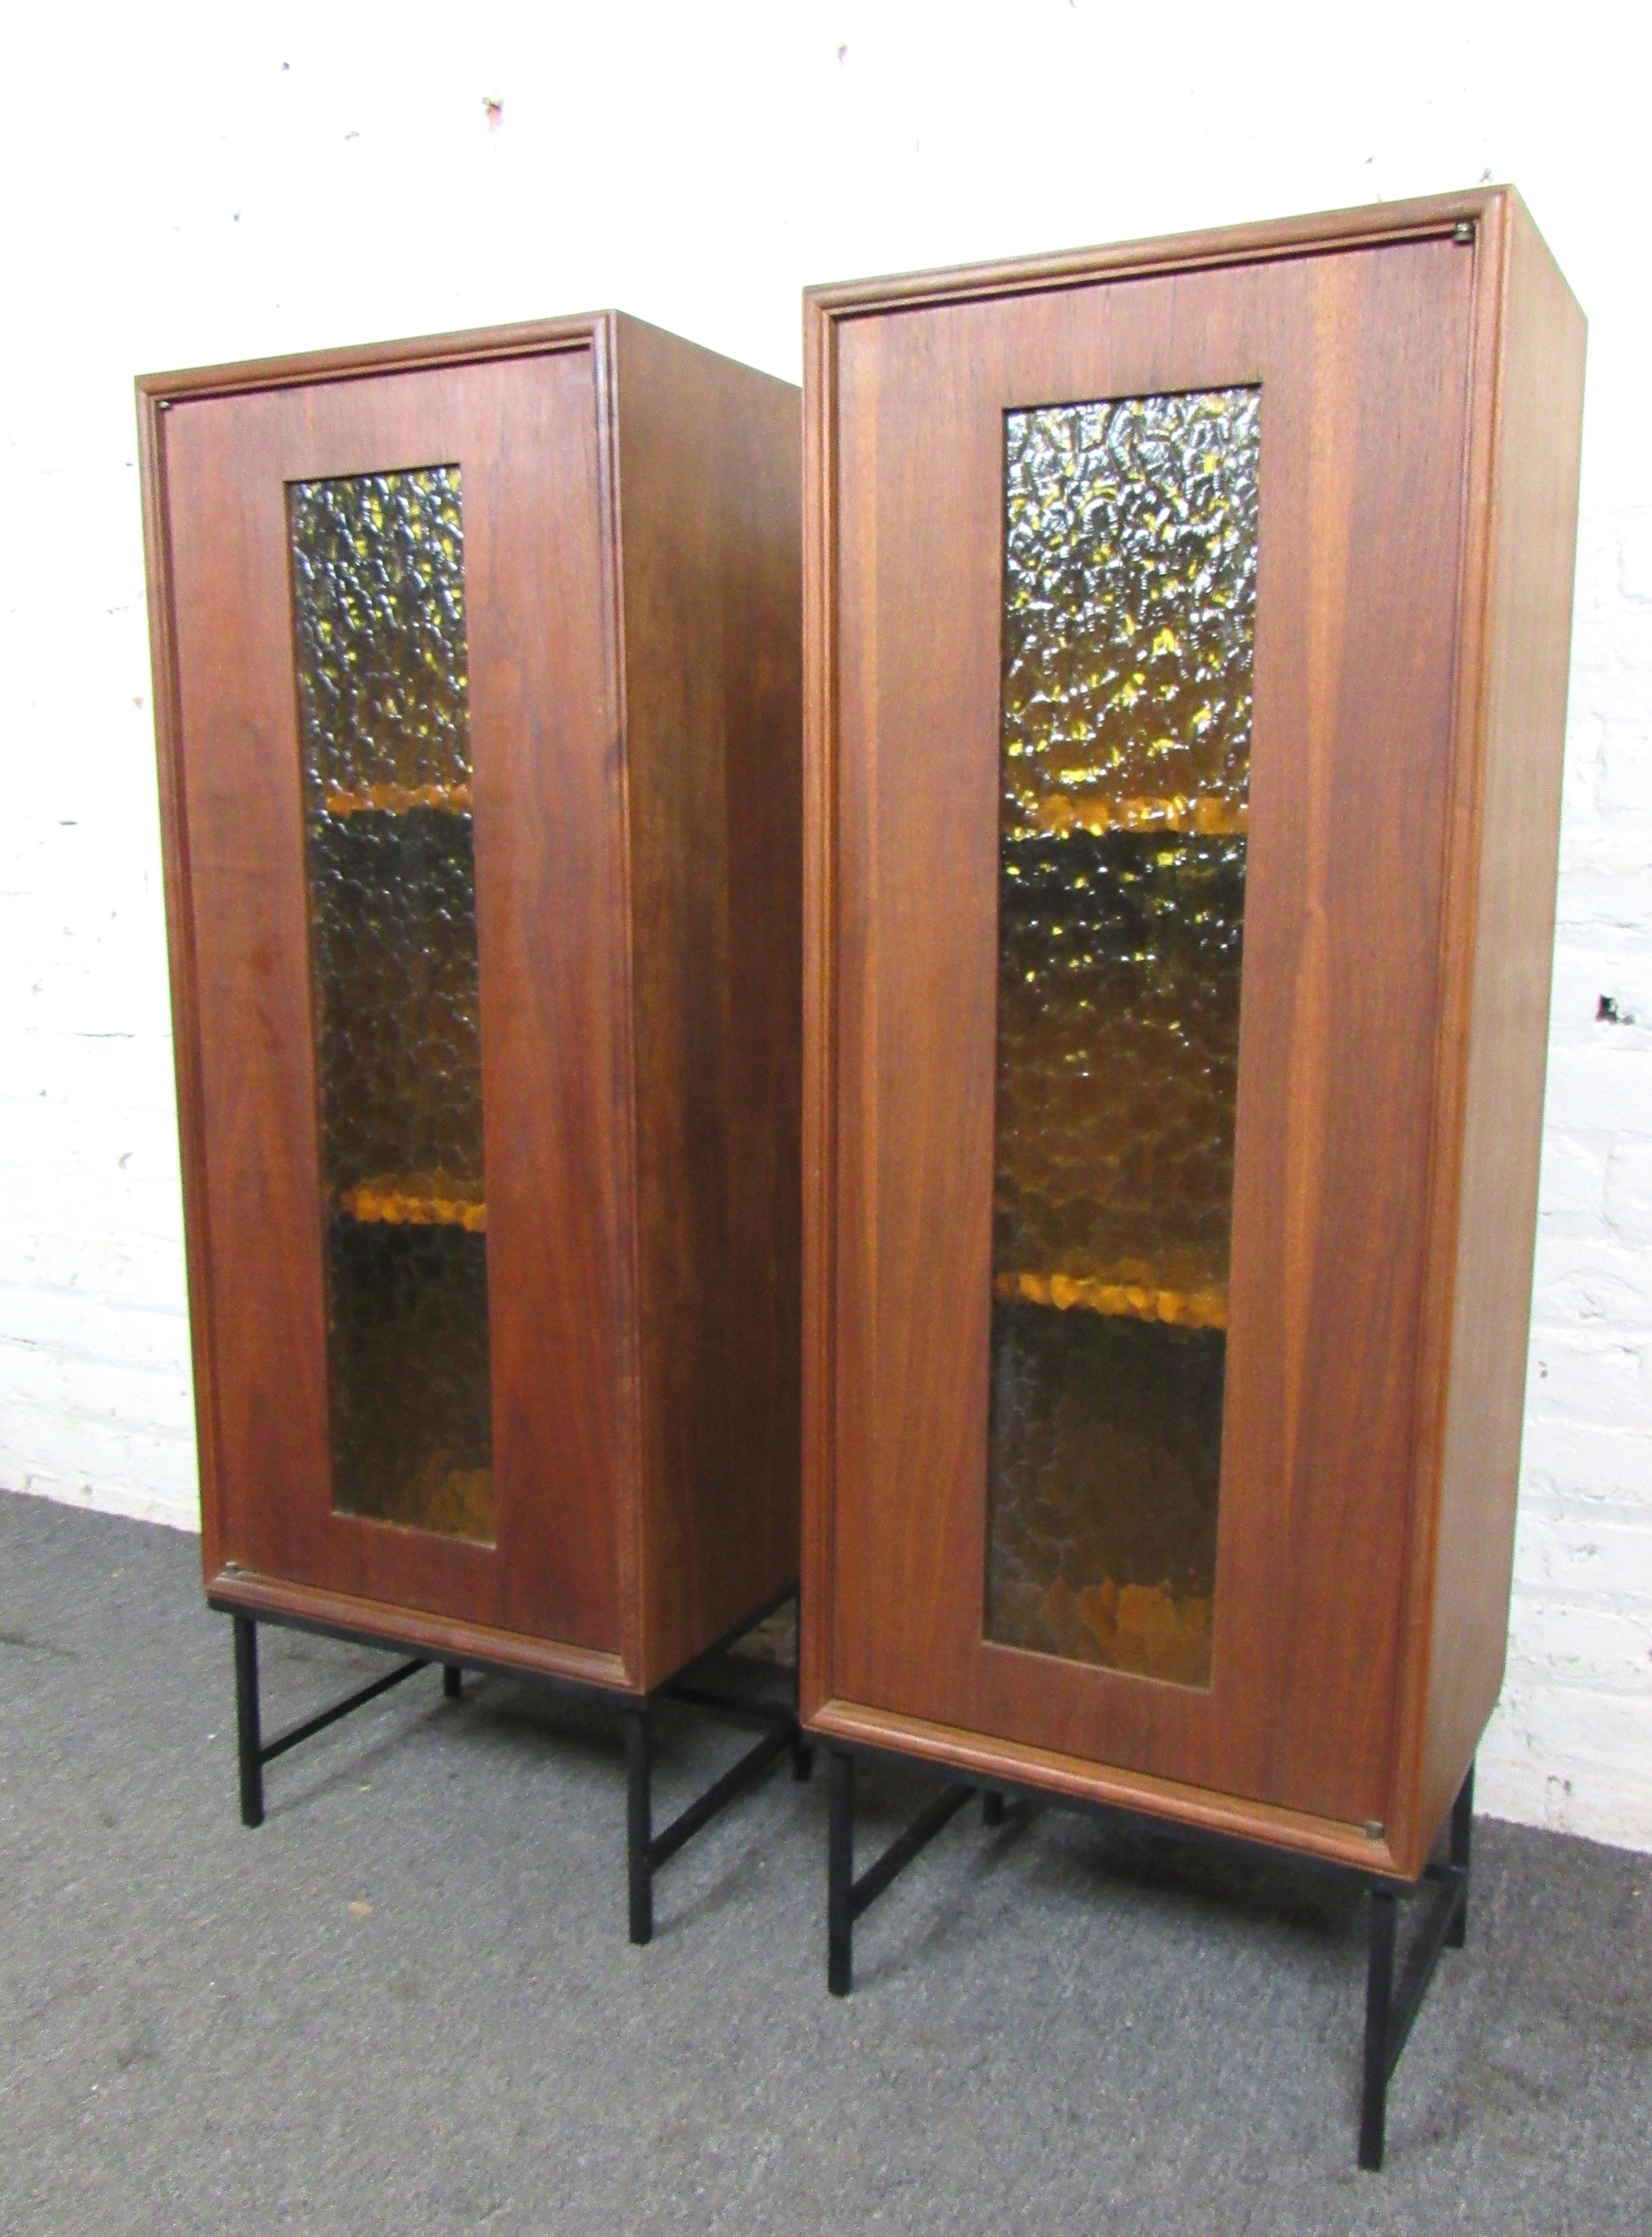 Unique pair of vintage modern glass front cabinets that light up from the inside. Amber toned glass gives a warm glow for your home.
(Please confirm location NY or NJ).